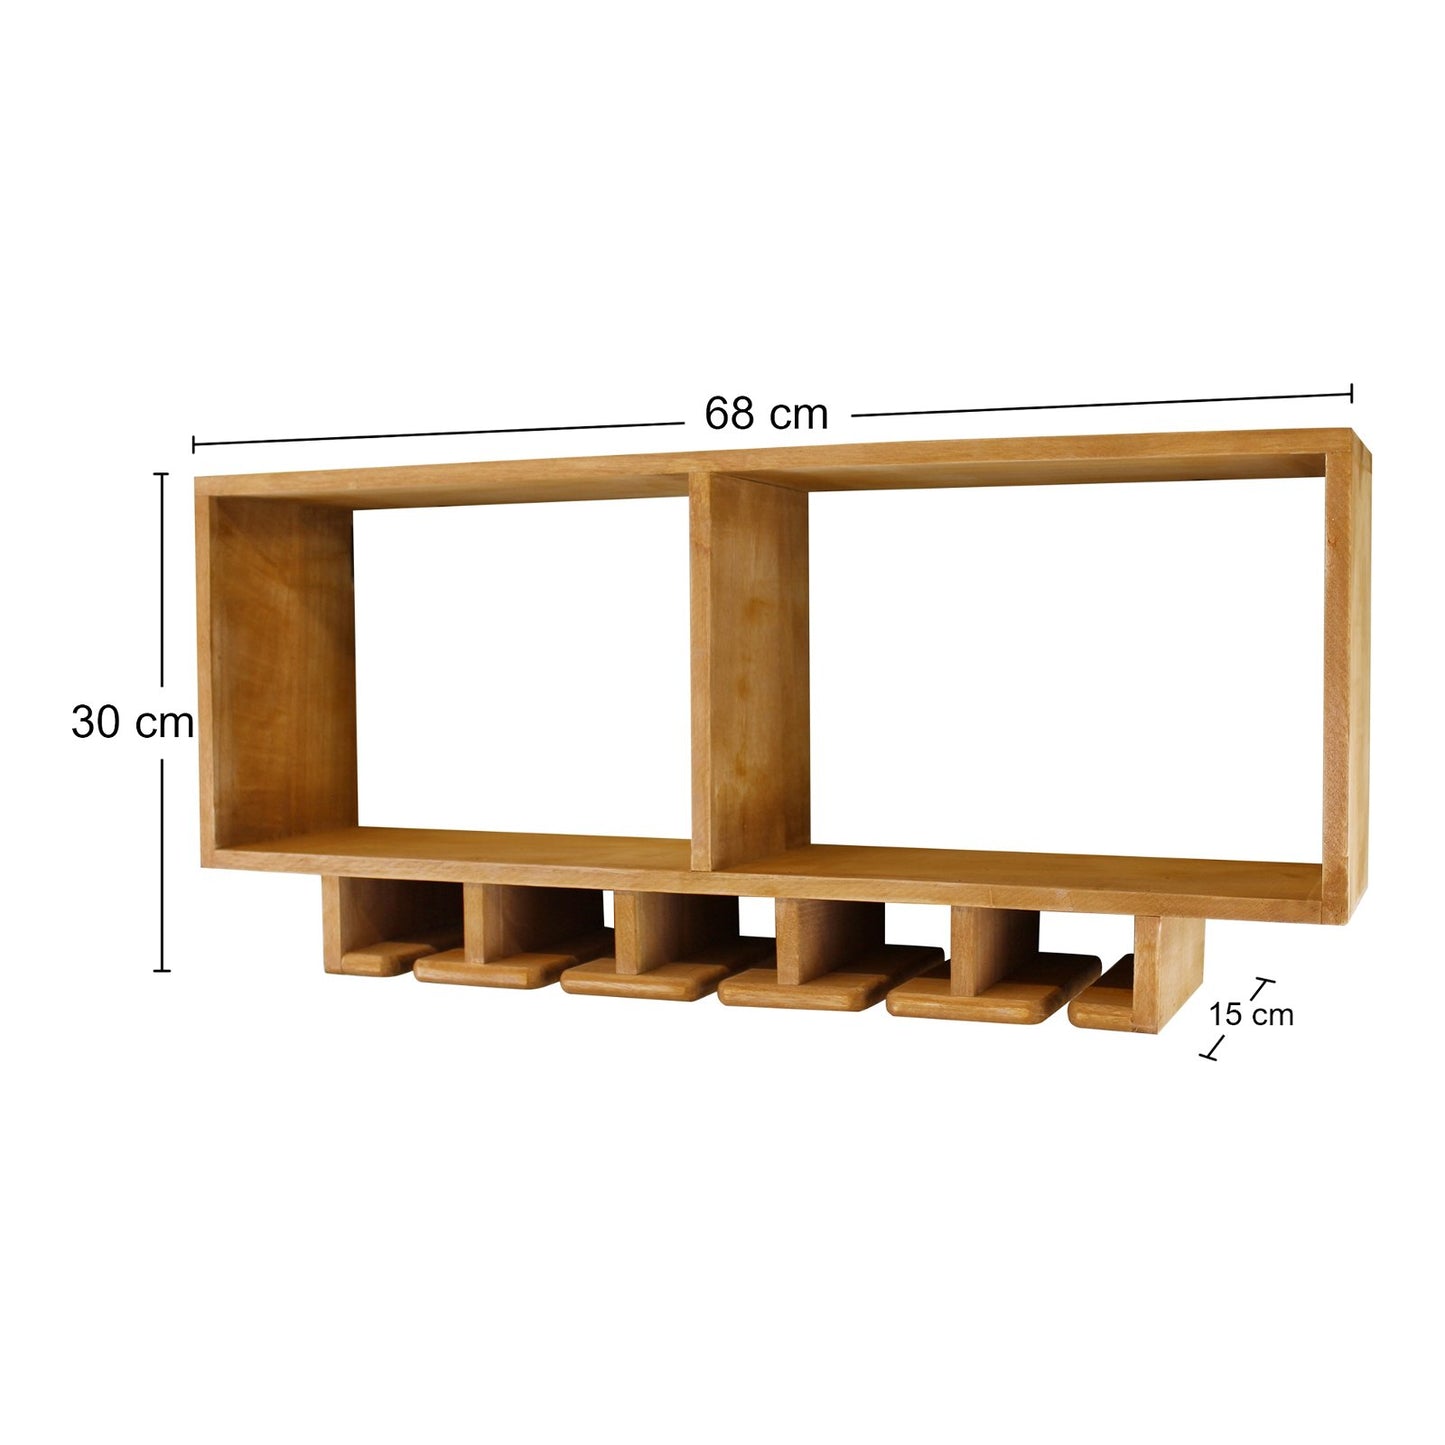 Kitchen Shelving Unit With Storage For Wine Glasses - Kaftan direct